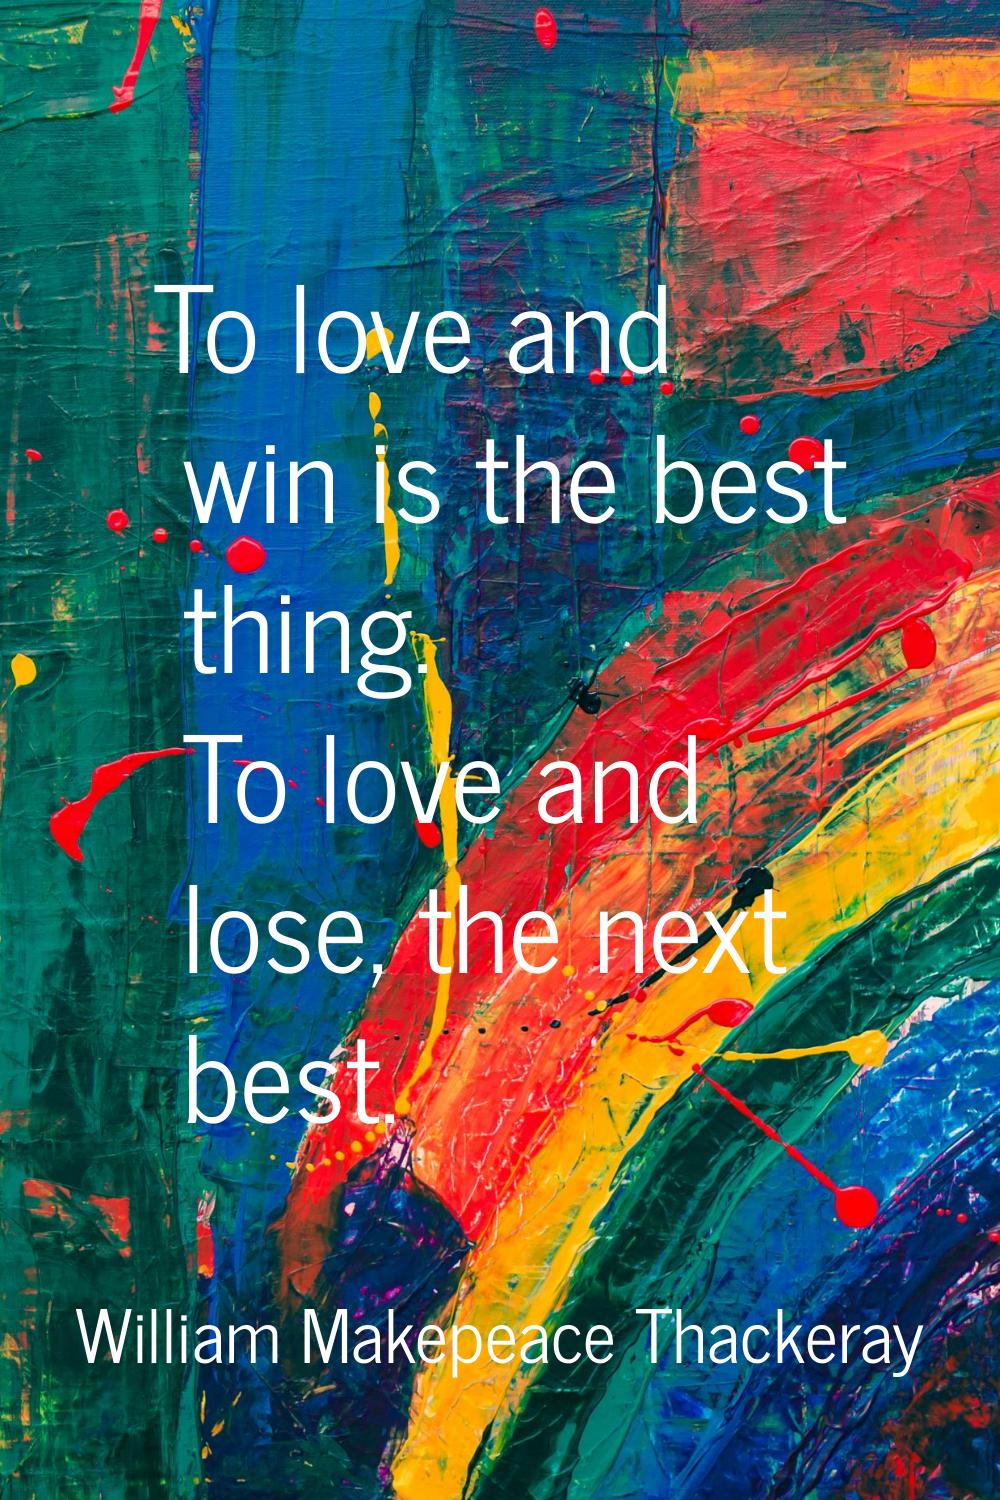 To love and win is the best thing. To love and lose, the next best.